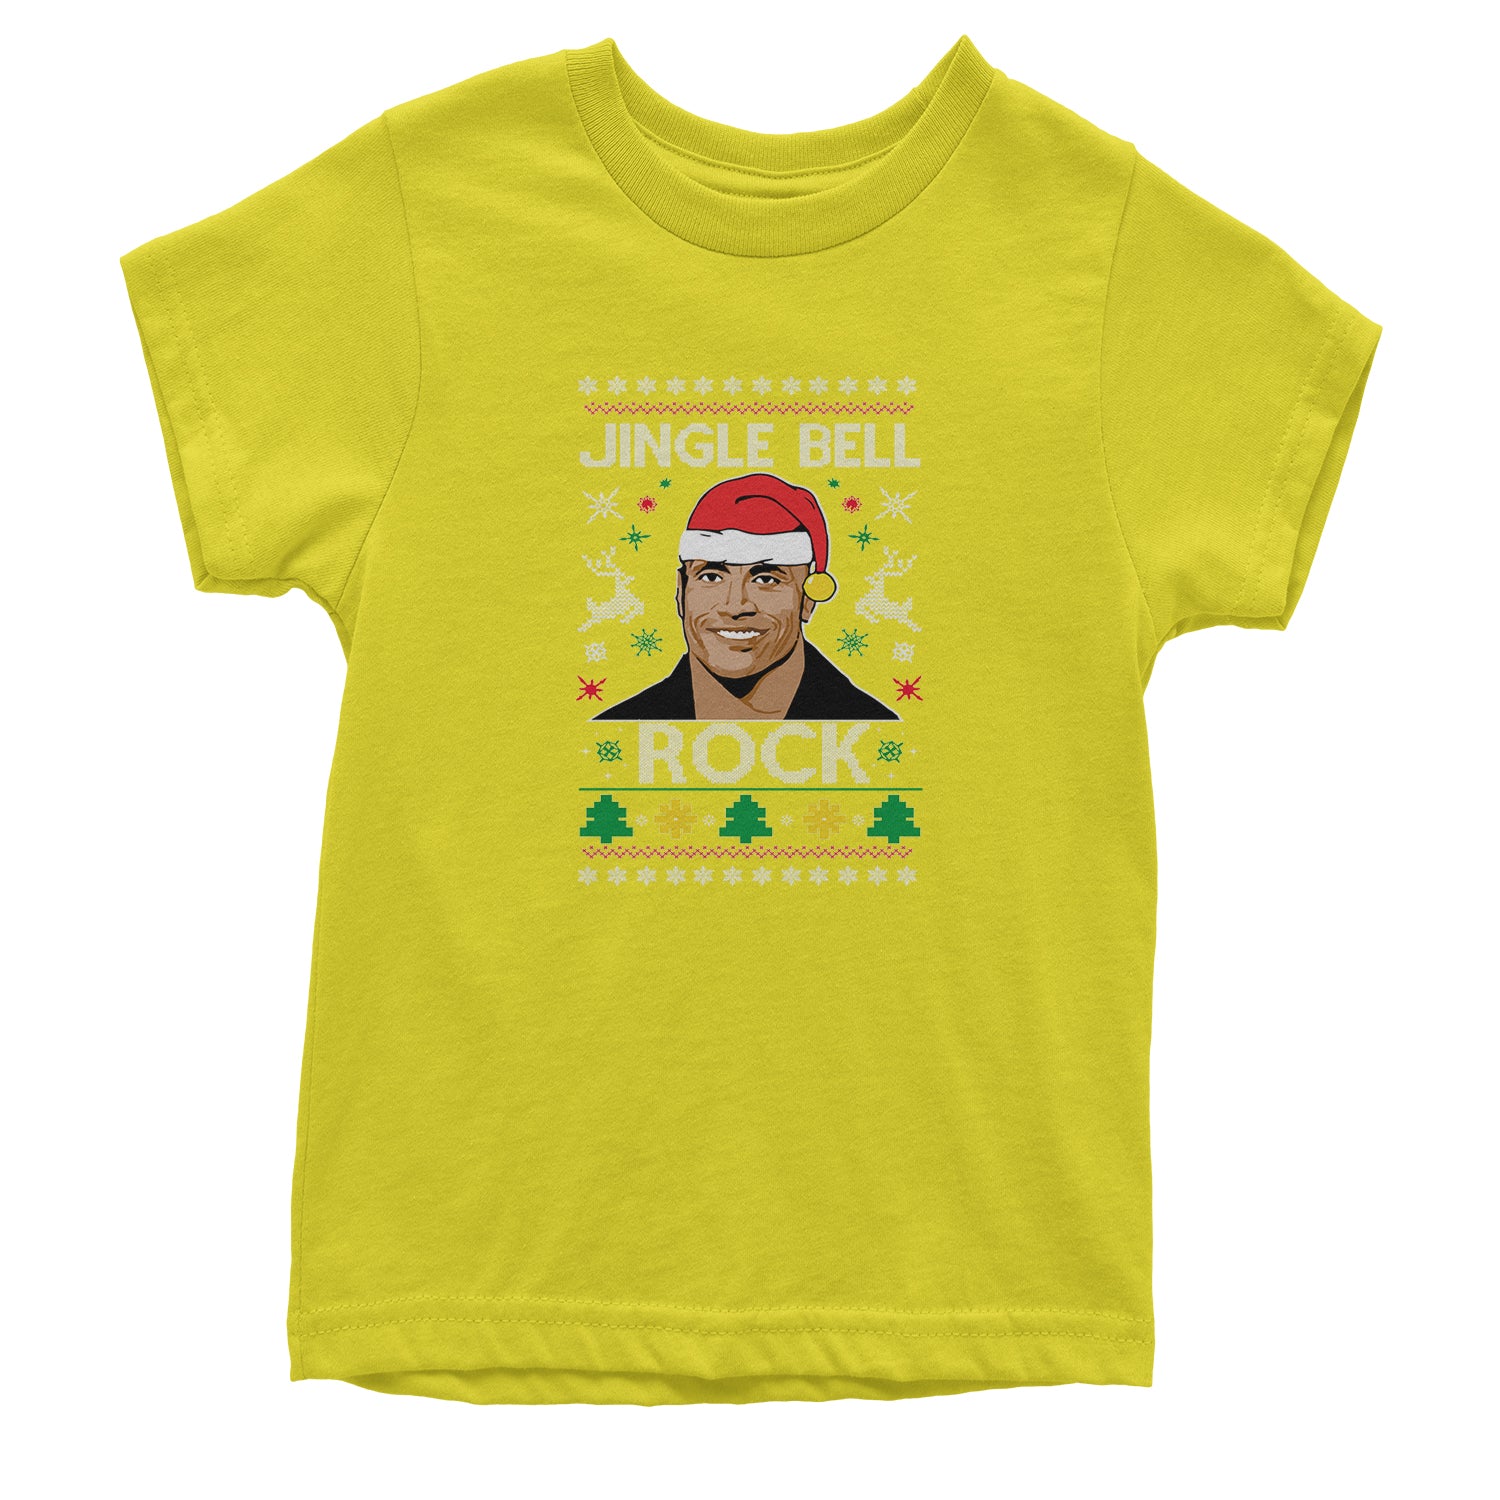 Jingle Bell Rock Ugly Christmas Youth T-shirt 2018, champ, Christmas, dwayne, johnson, peoples, rock, Sweatshirts, the, Ugly by Expression Tees